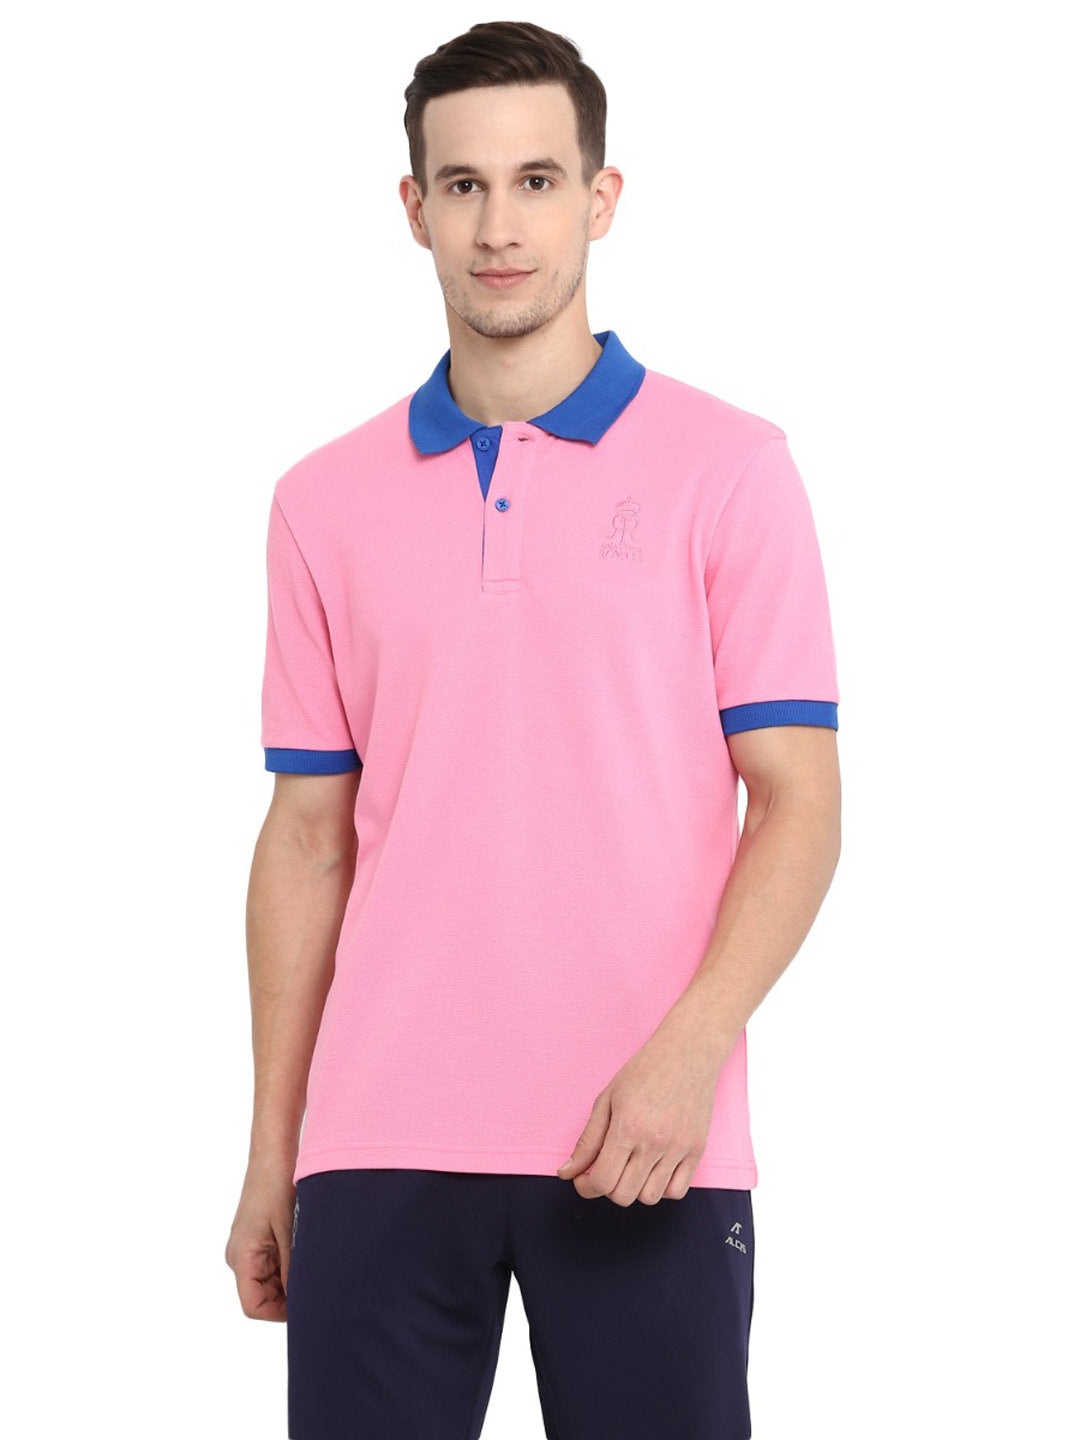 Alcis Men Rajasthan Royals Fanwear Polo-S-Pink